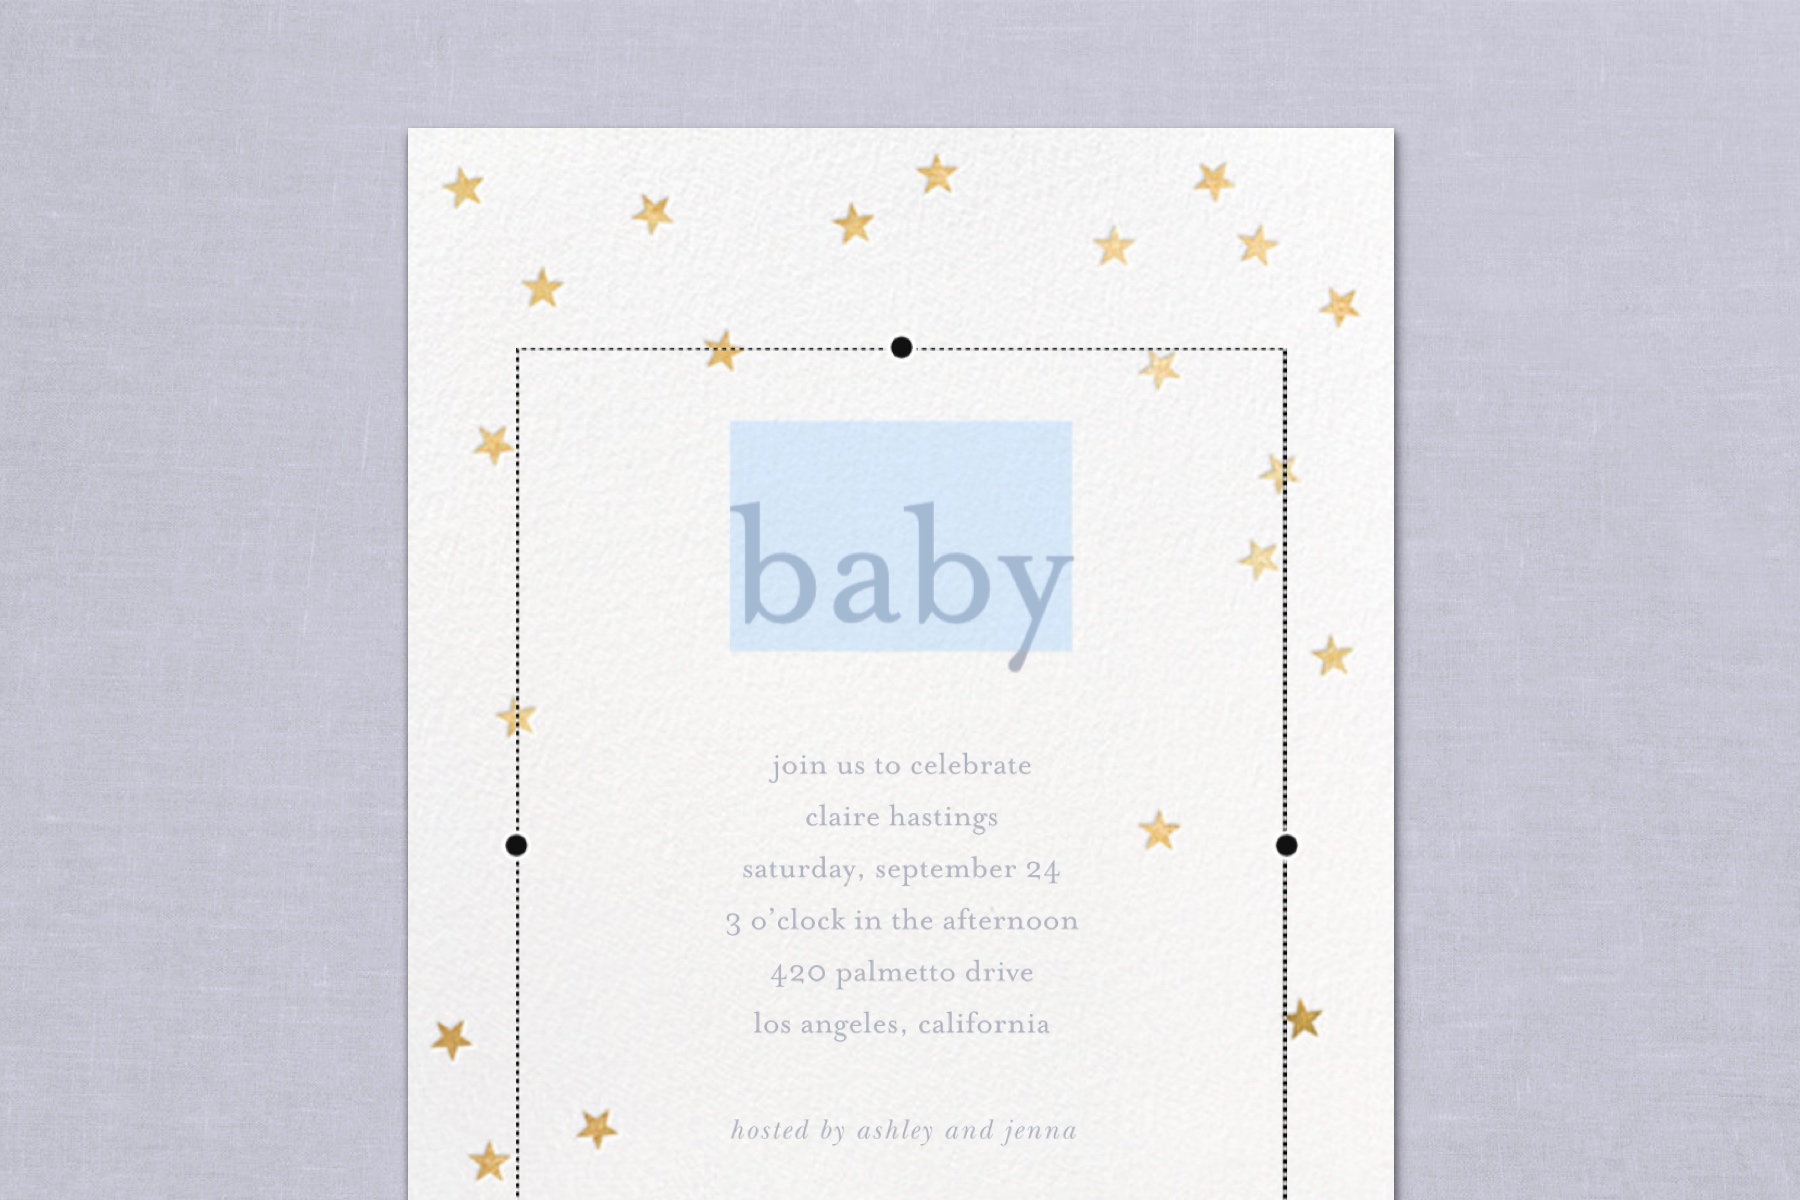 paper-party-supplies-invitations-announcements-invitations-baby